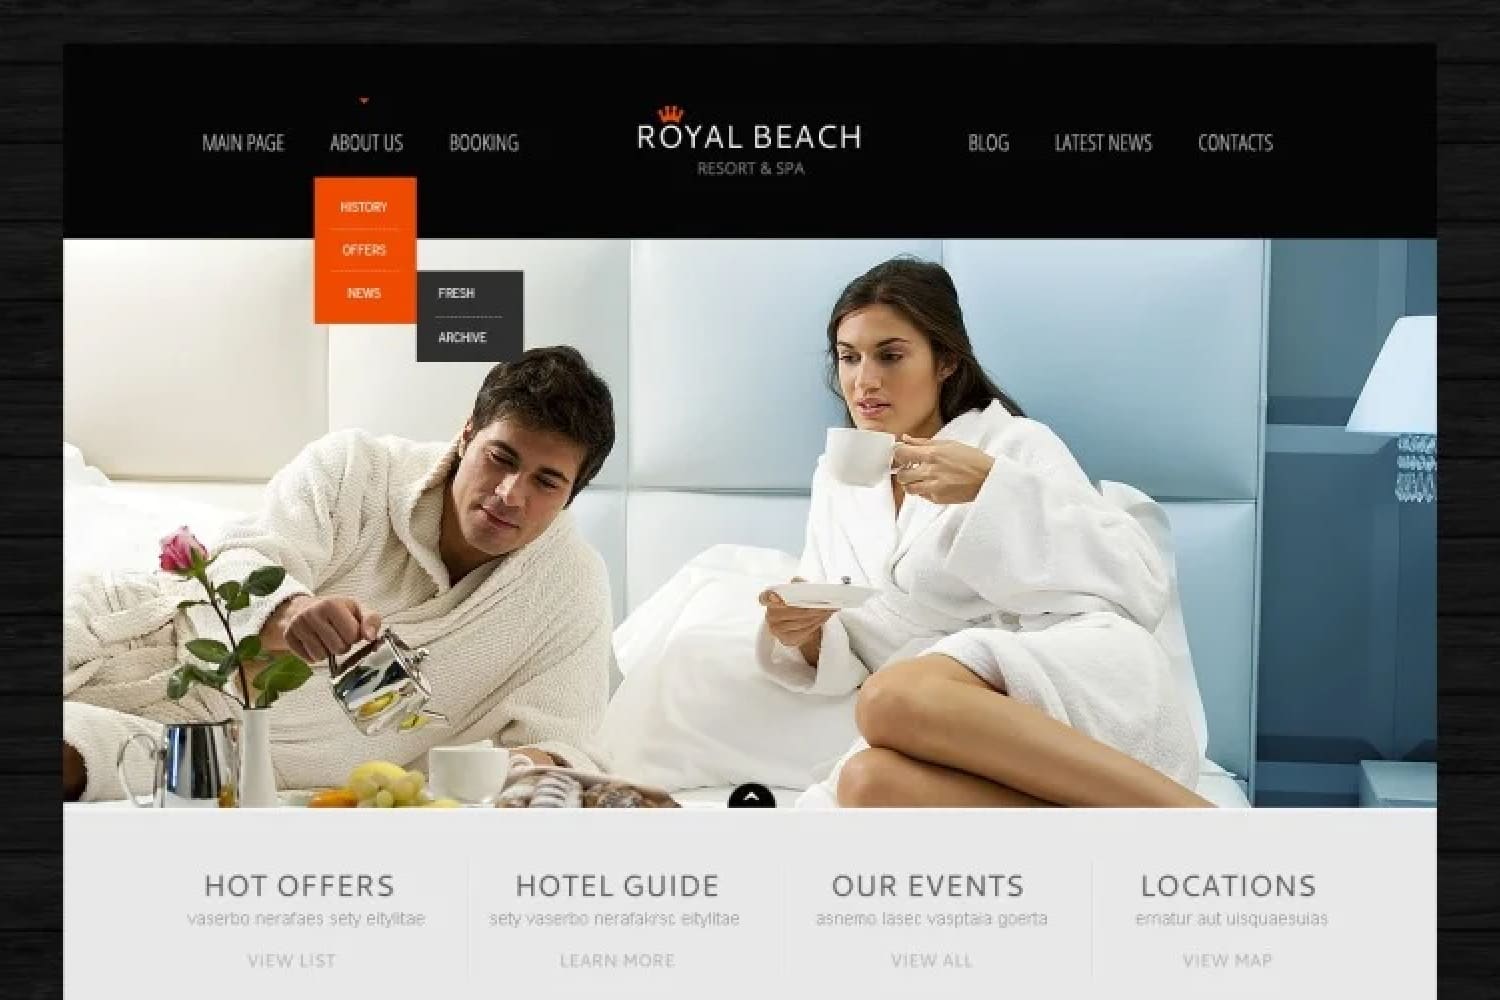 Hotel website home page with photo of couple in bathrobes on bed in room.